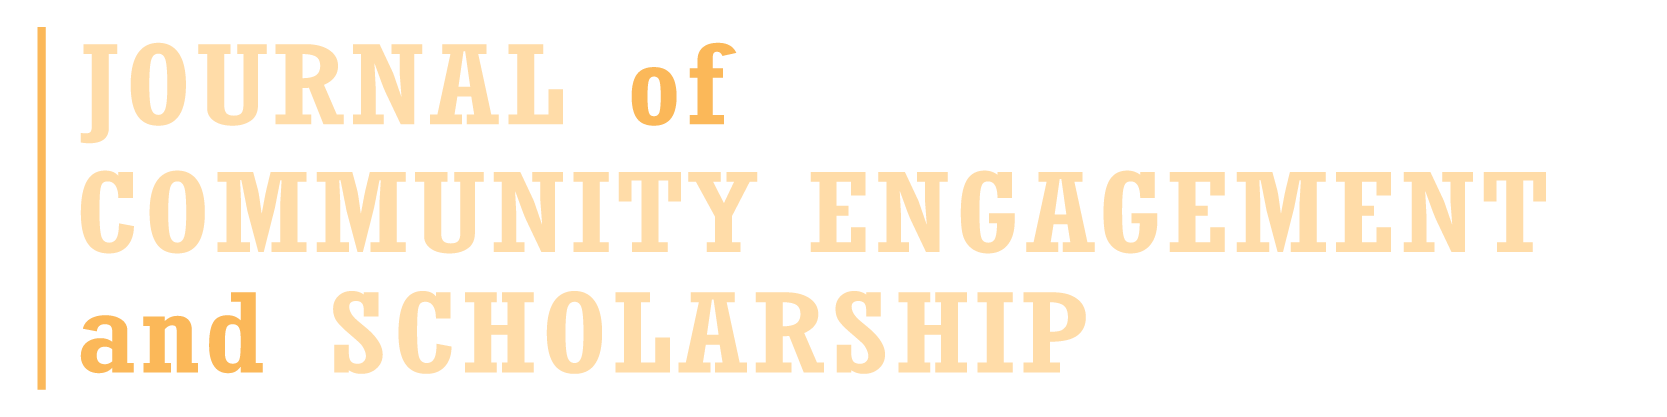 Journal of Community Engagement and Scholarship logo